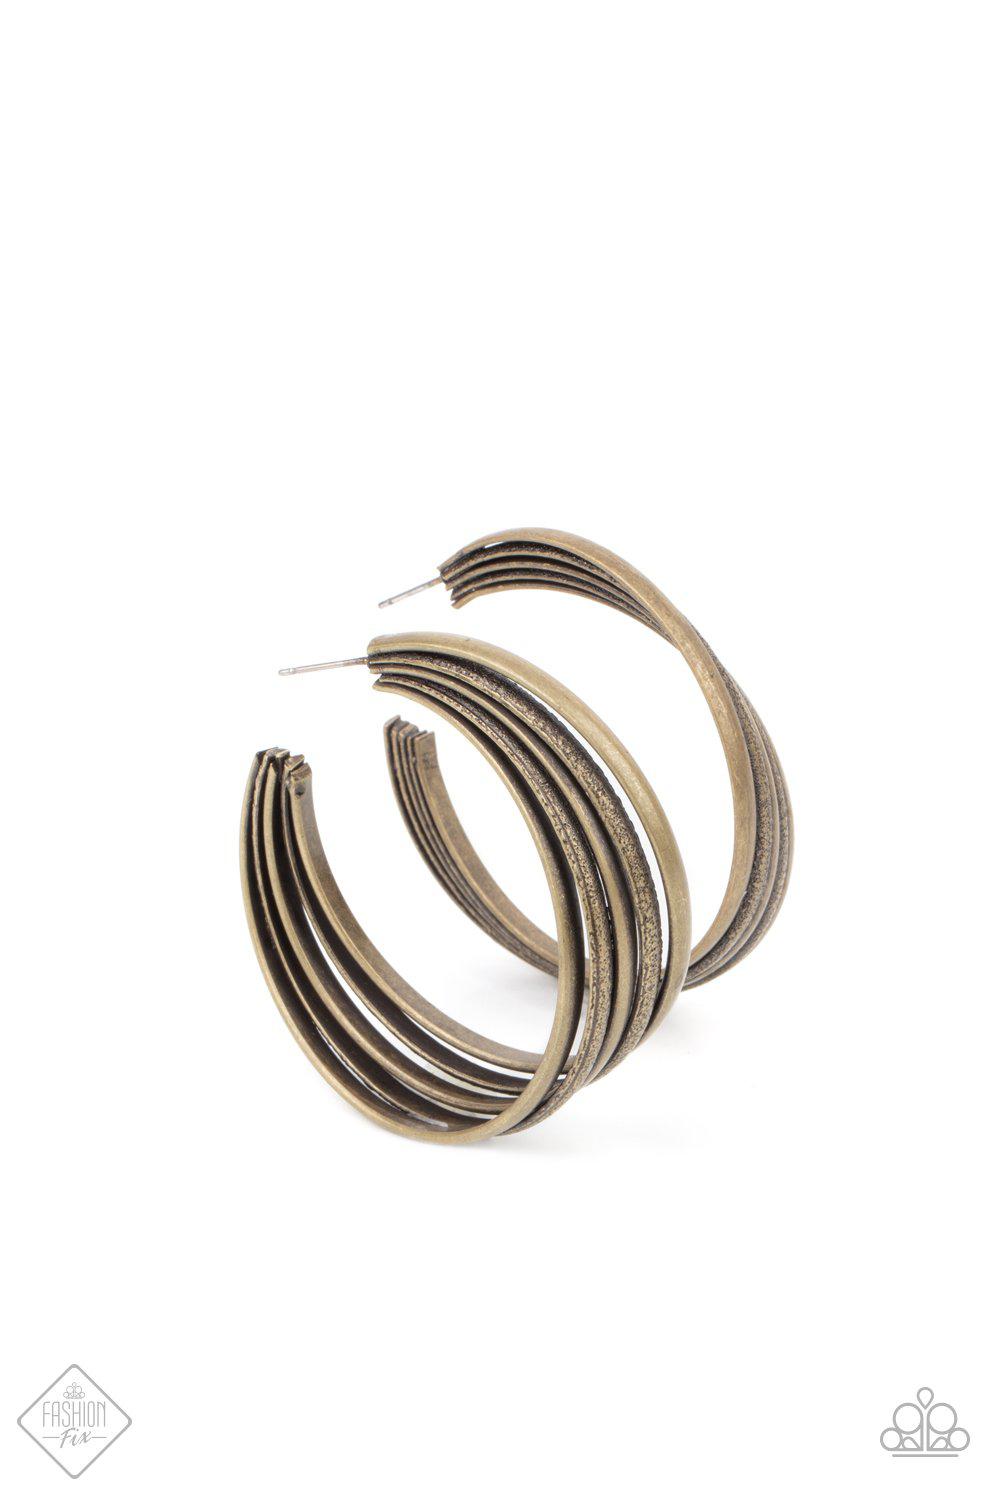 In Sync Brass Hoop Earrings - Paparazzi Accessories- lightbox - CarasShop.com - $5 Jewelry by Cara Jewels